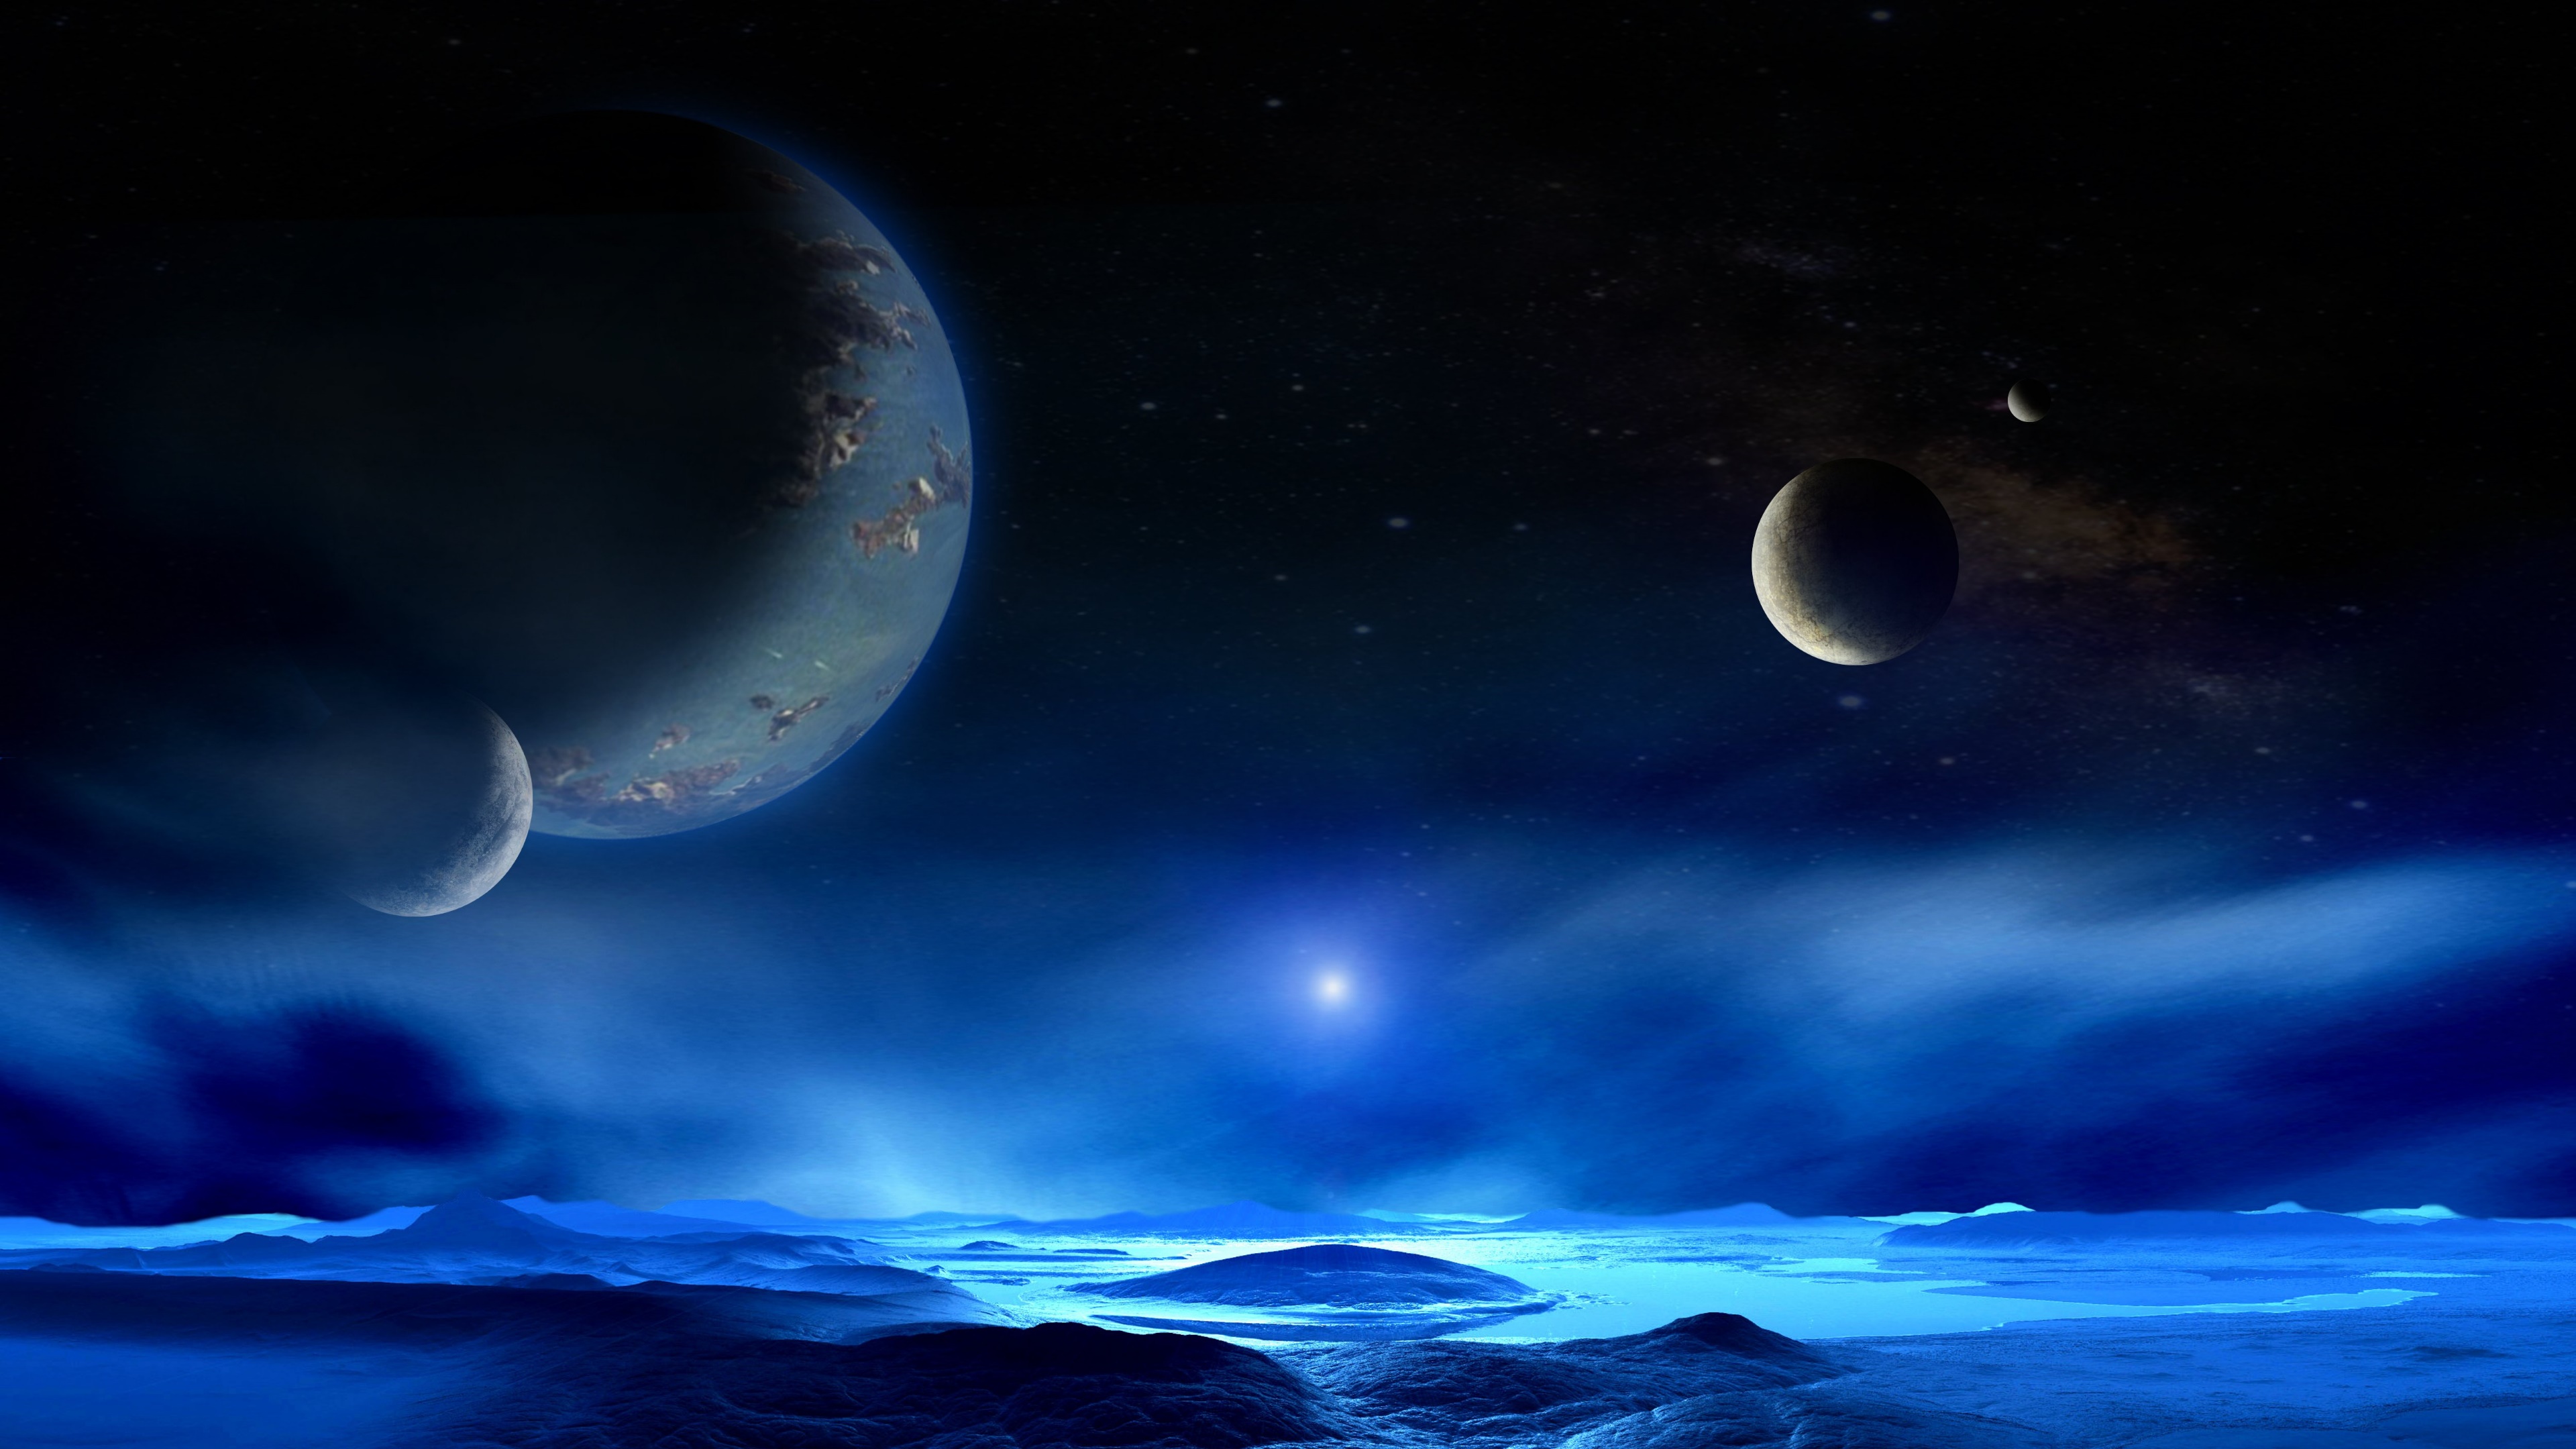 HD wallpaper Galaxy blue space distant planets photo of space  Wallpaper  Flare